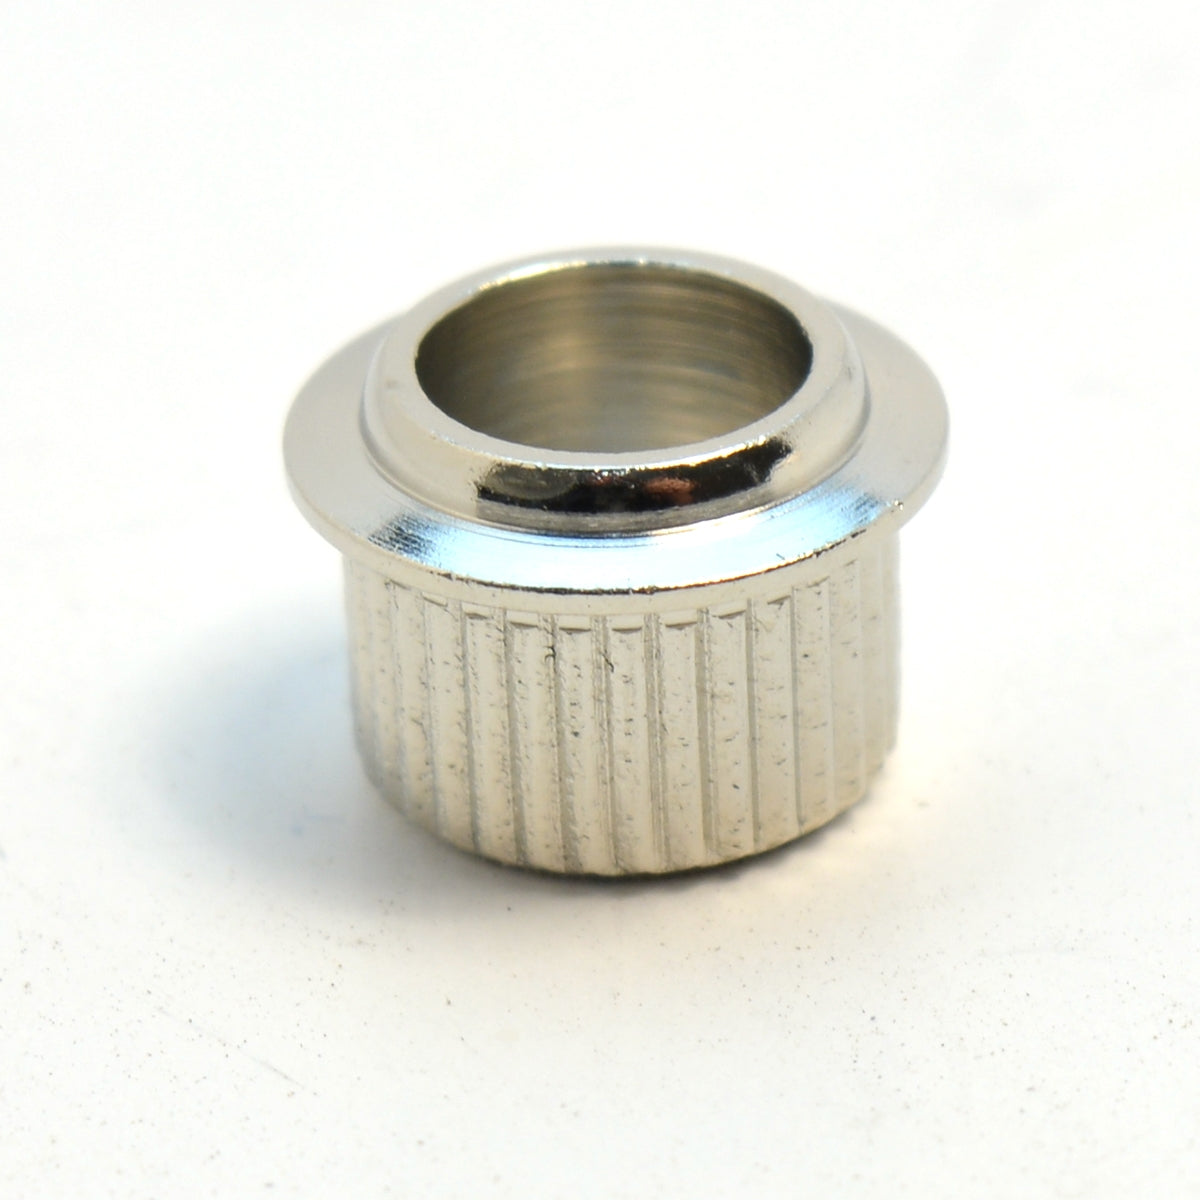 Replacement Bushings for Fender machine heads, Nickel,single